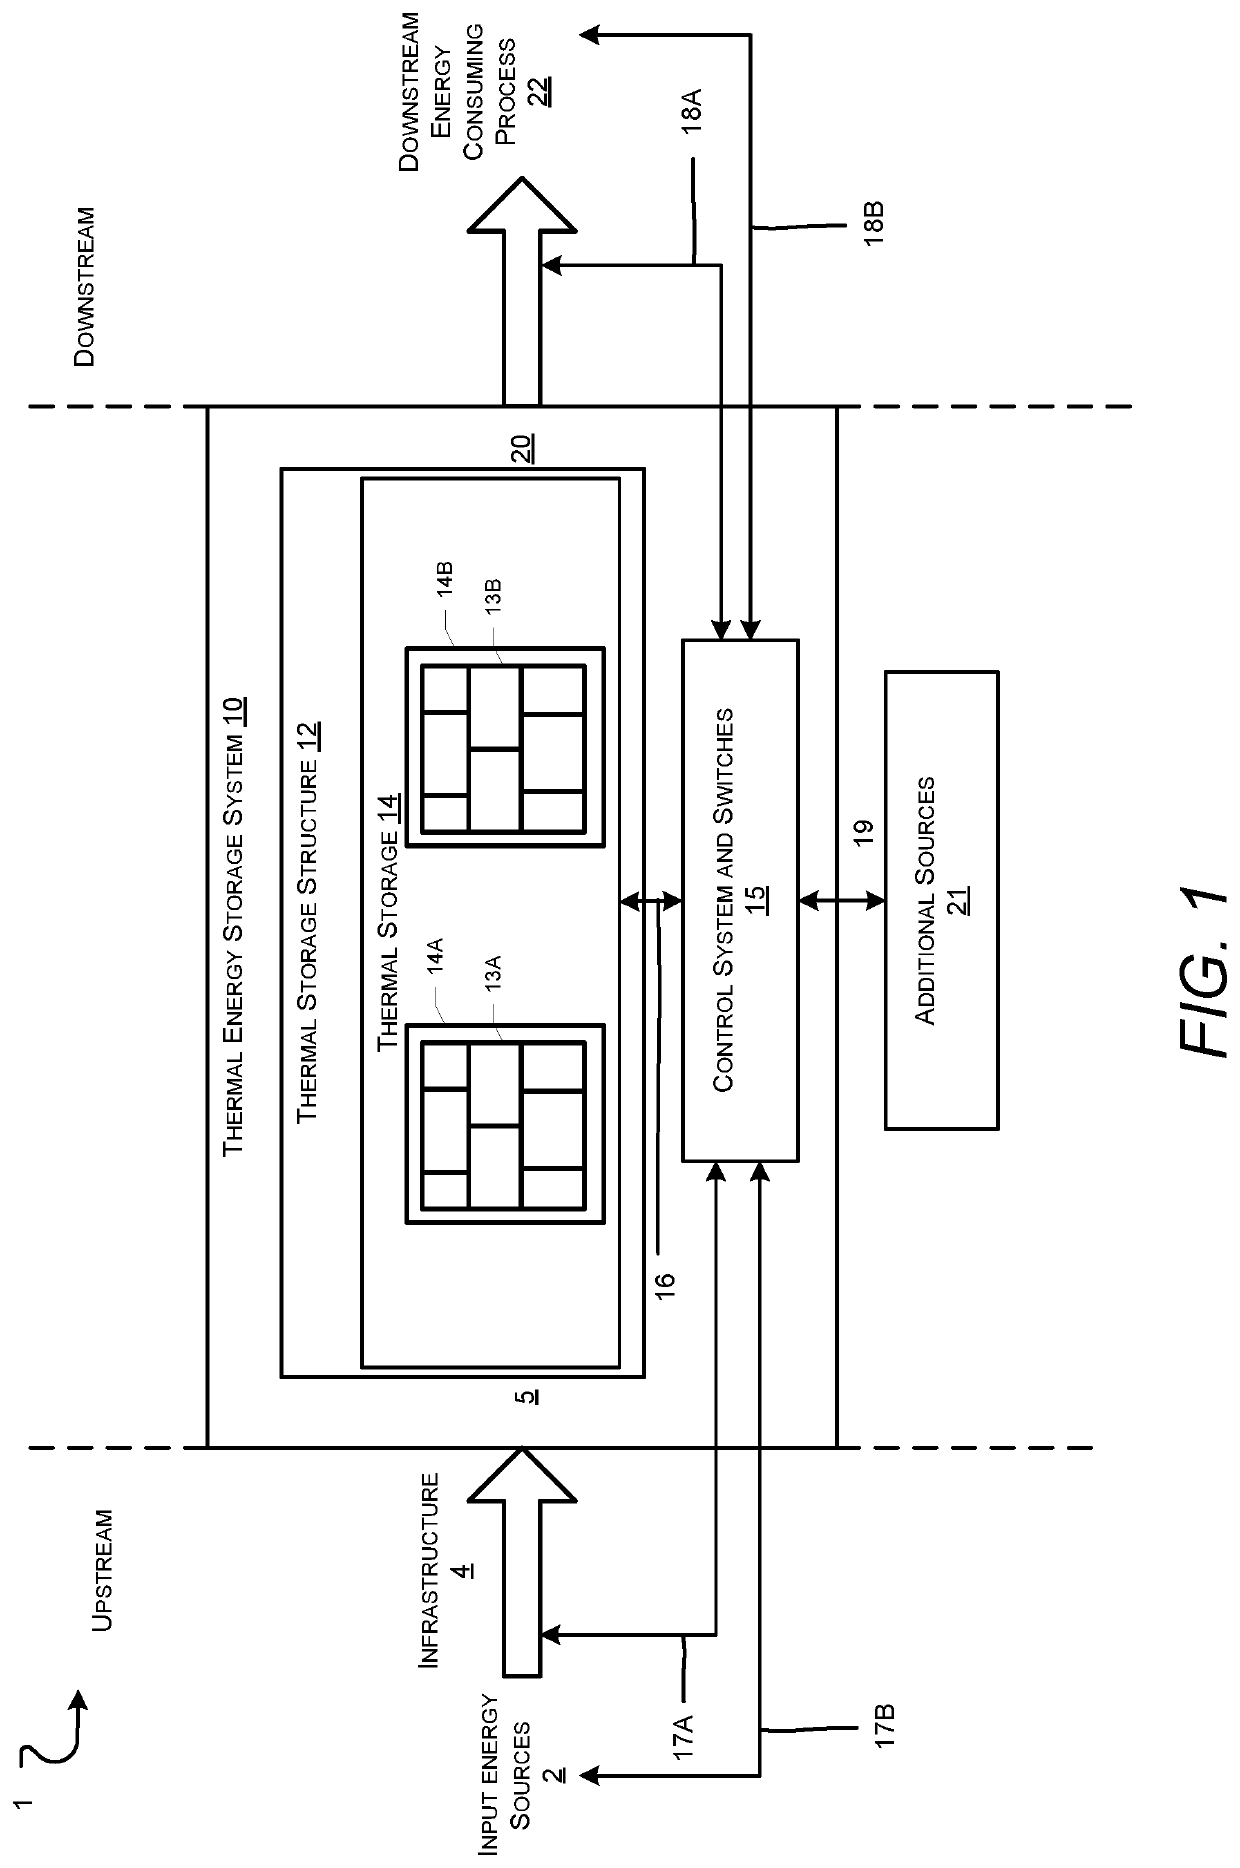 Thermal Energy Storage System with System for Deep Discharge of Thermal Storage Blocks